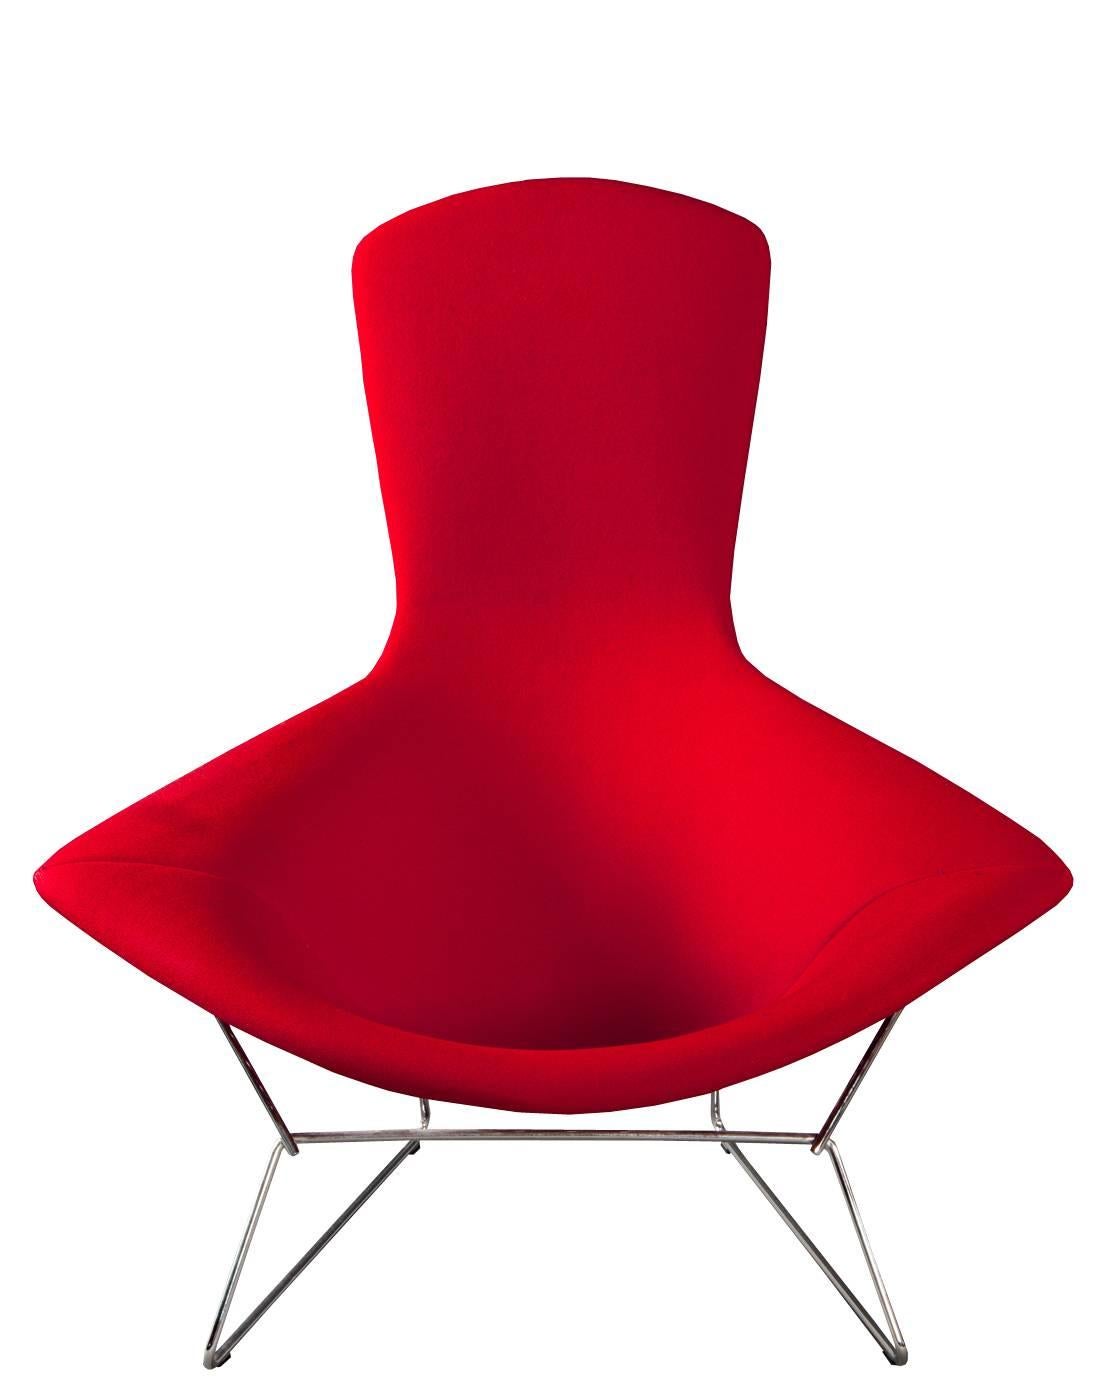 Lounge chair model bird chair designed in 1952 by Harry Bertoia for Knoll International.

The chair has a chromed steel wire design and upholstered in original classic bouclé Cayenne color fabric. The seat rocks on rubber